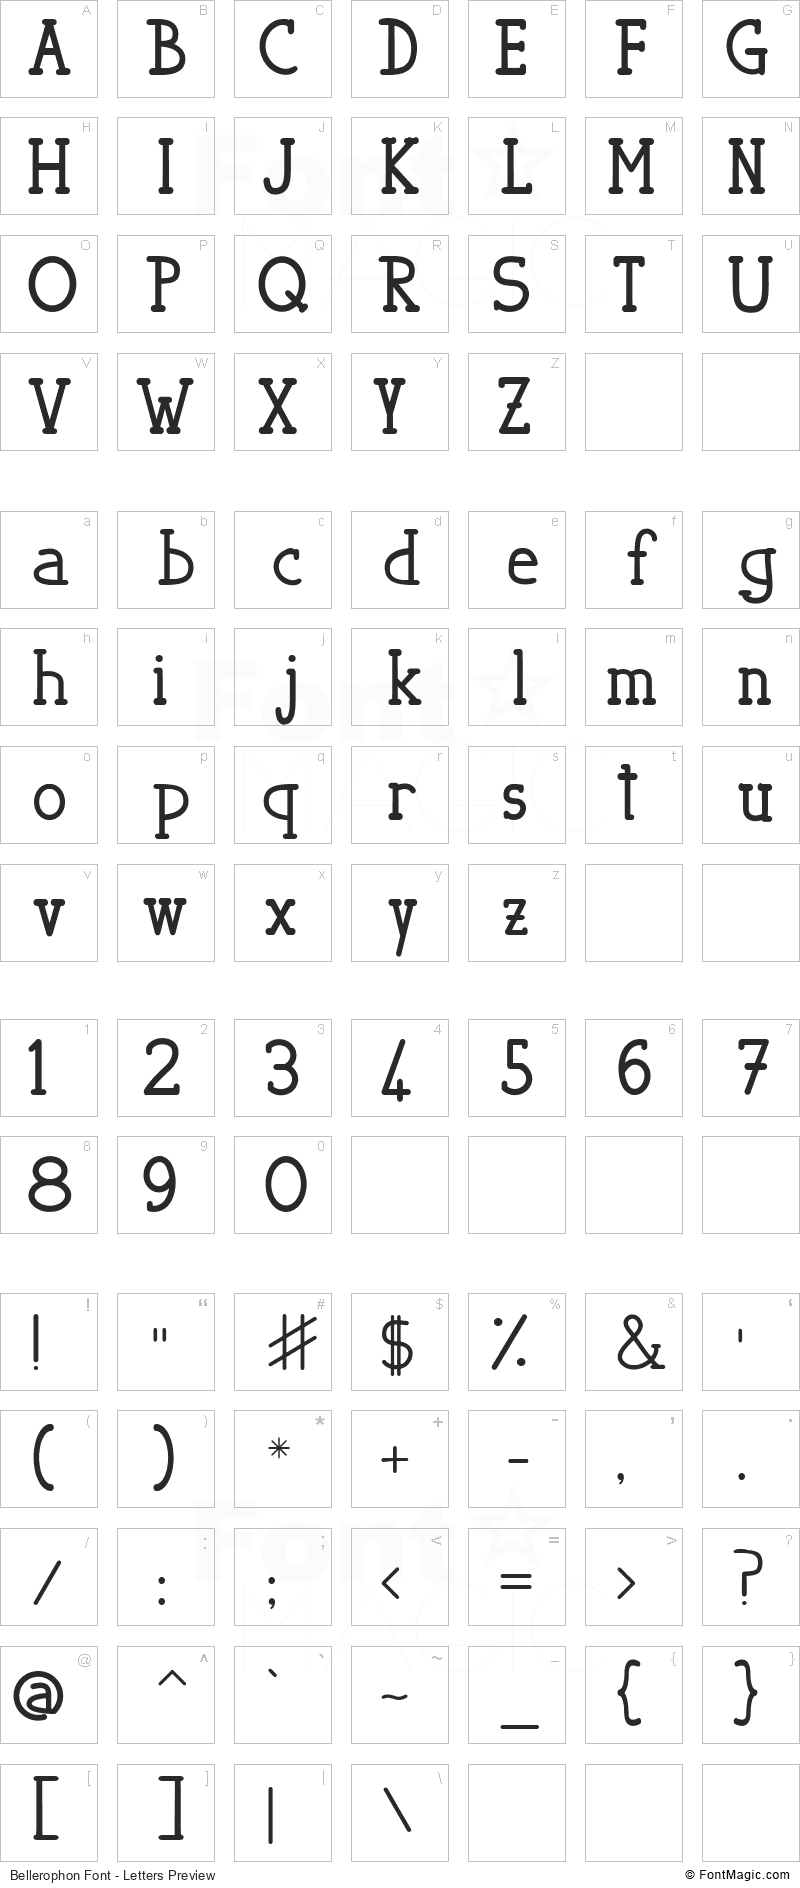 Bellerophon Font - All Latters Preview Chart